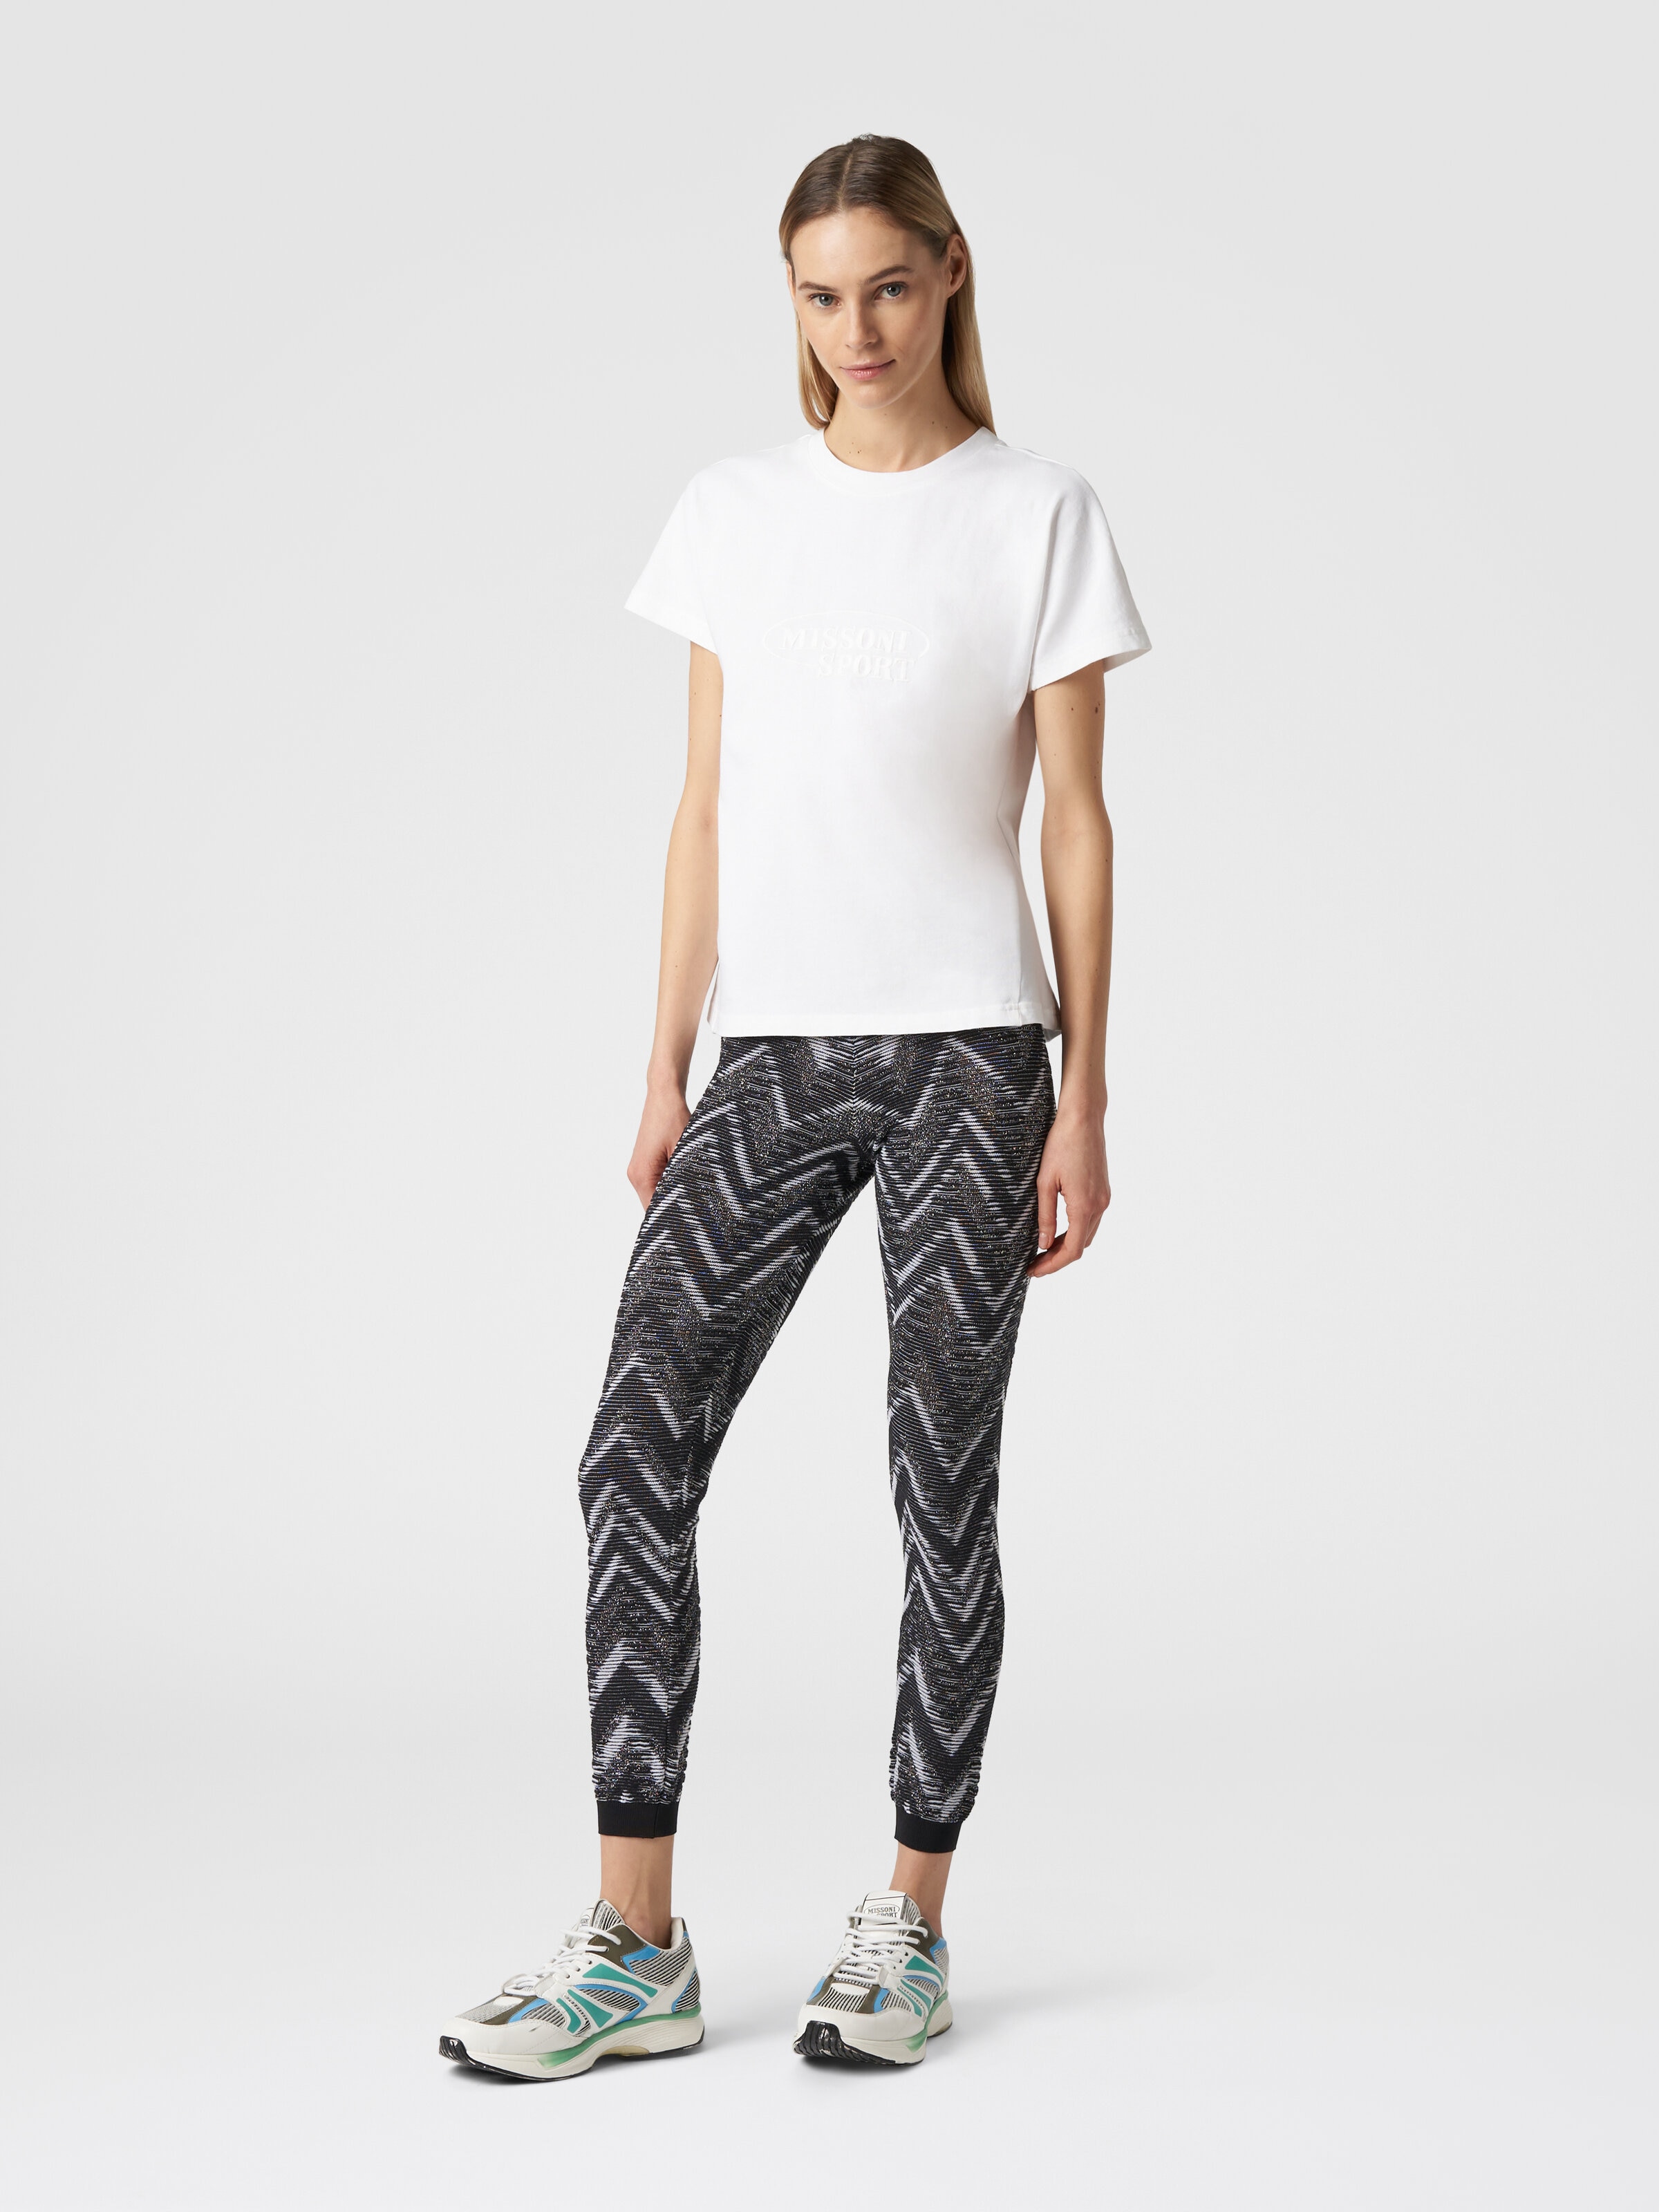 Leggings in knit with lurex and logo, Black & White - 1